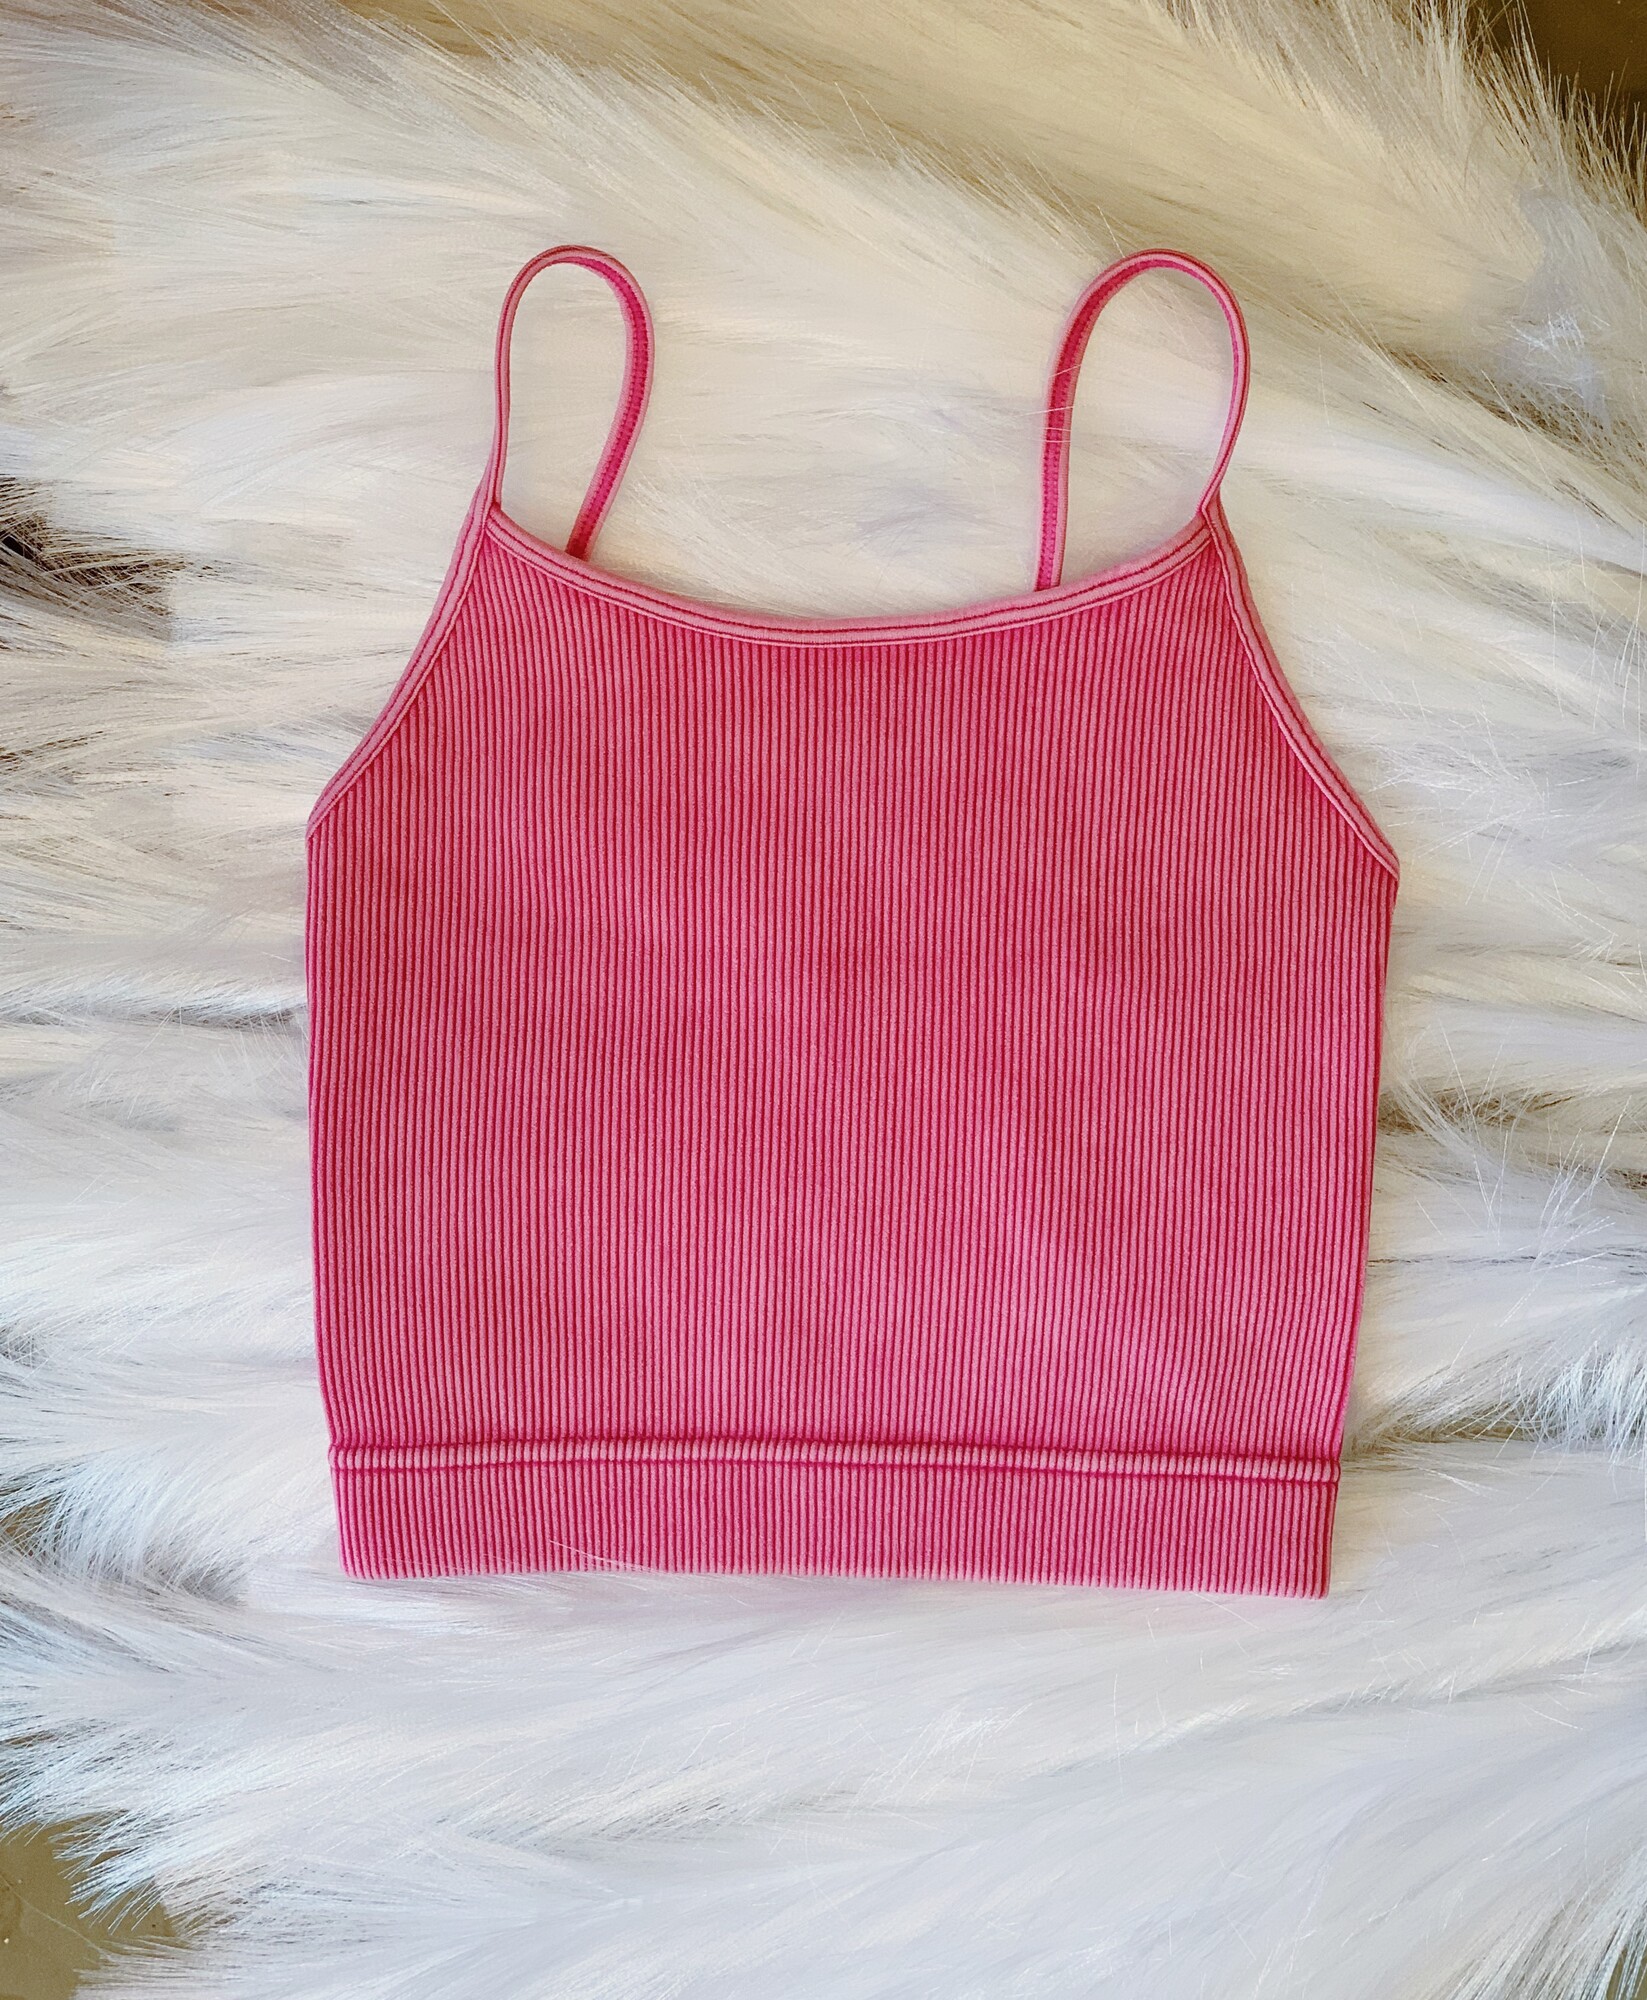 These adorable, athletic bralettes are made of a stretchy, breathable fabric!